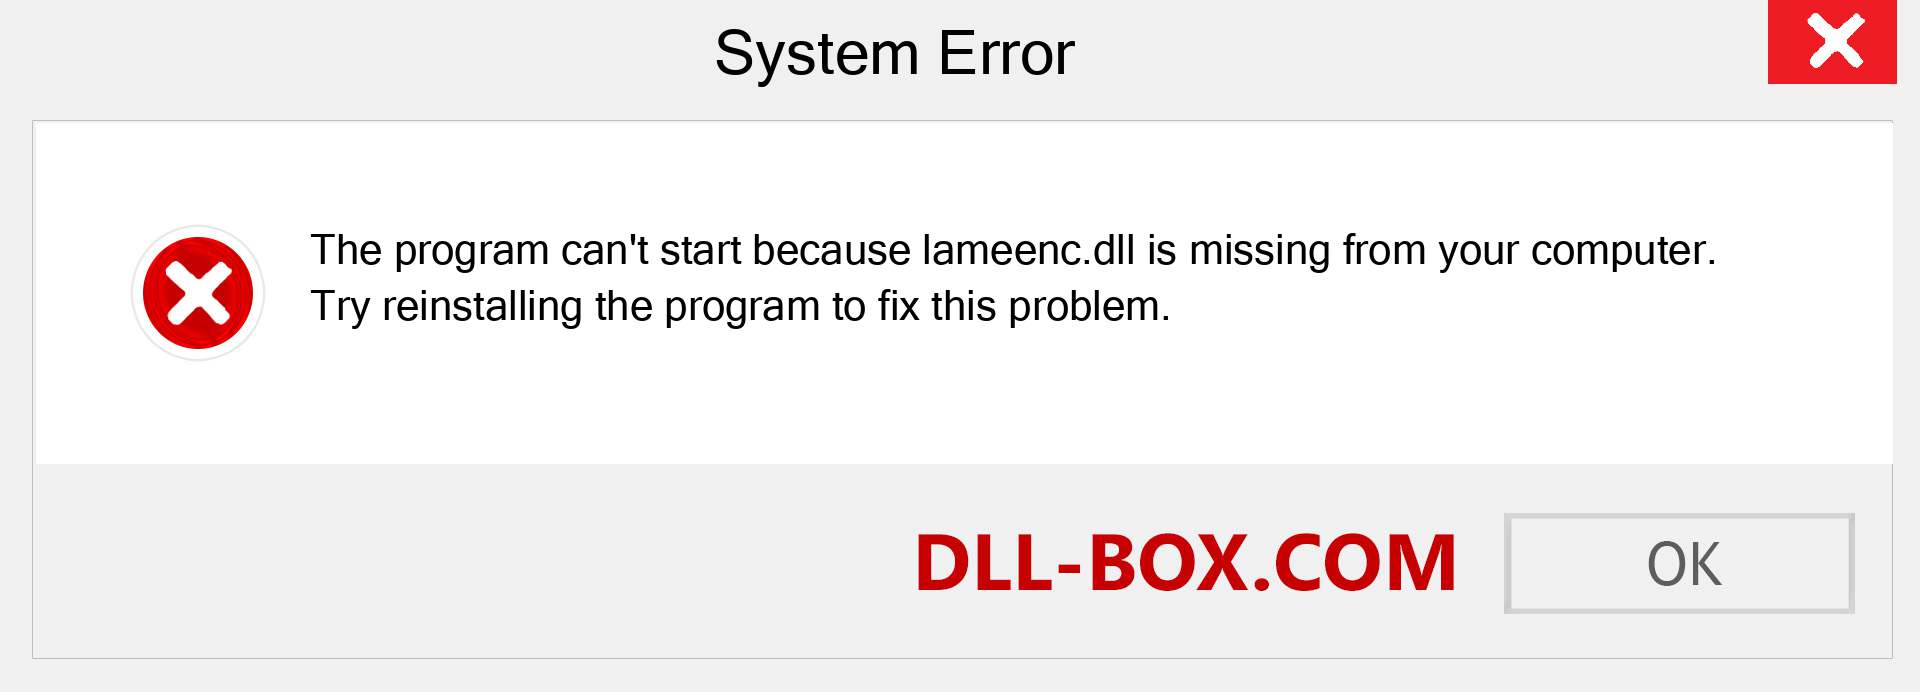  lameenc.dll file is missing?. Download for Windows 7, 8, 10 - Fix  lameenc dll Missing Error on Windows, photos, images